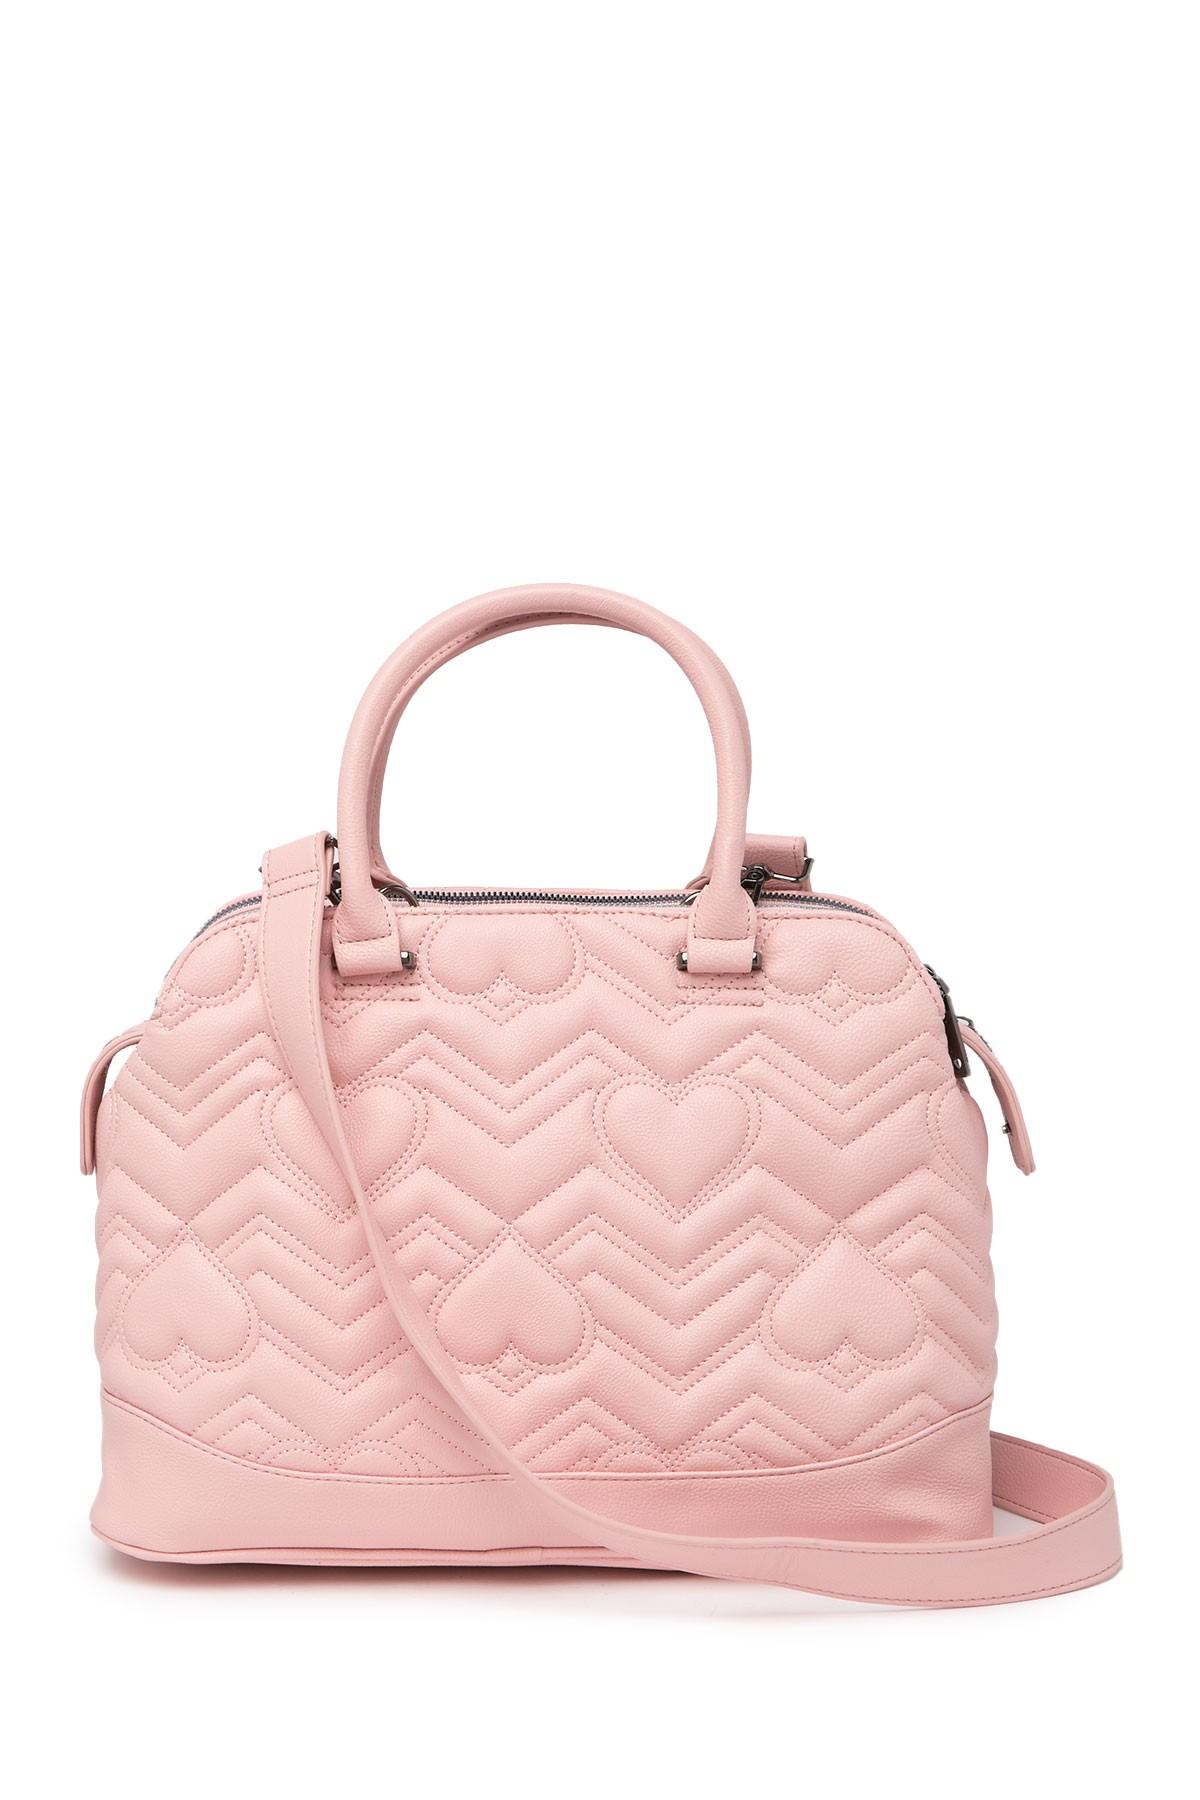 Betsey Johnson Lorraine Quilted Heart Satchel in Pink | Lyst